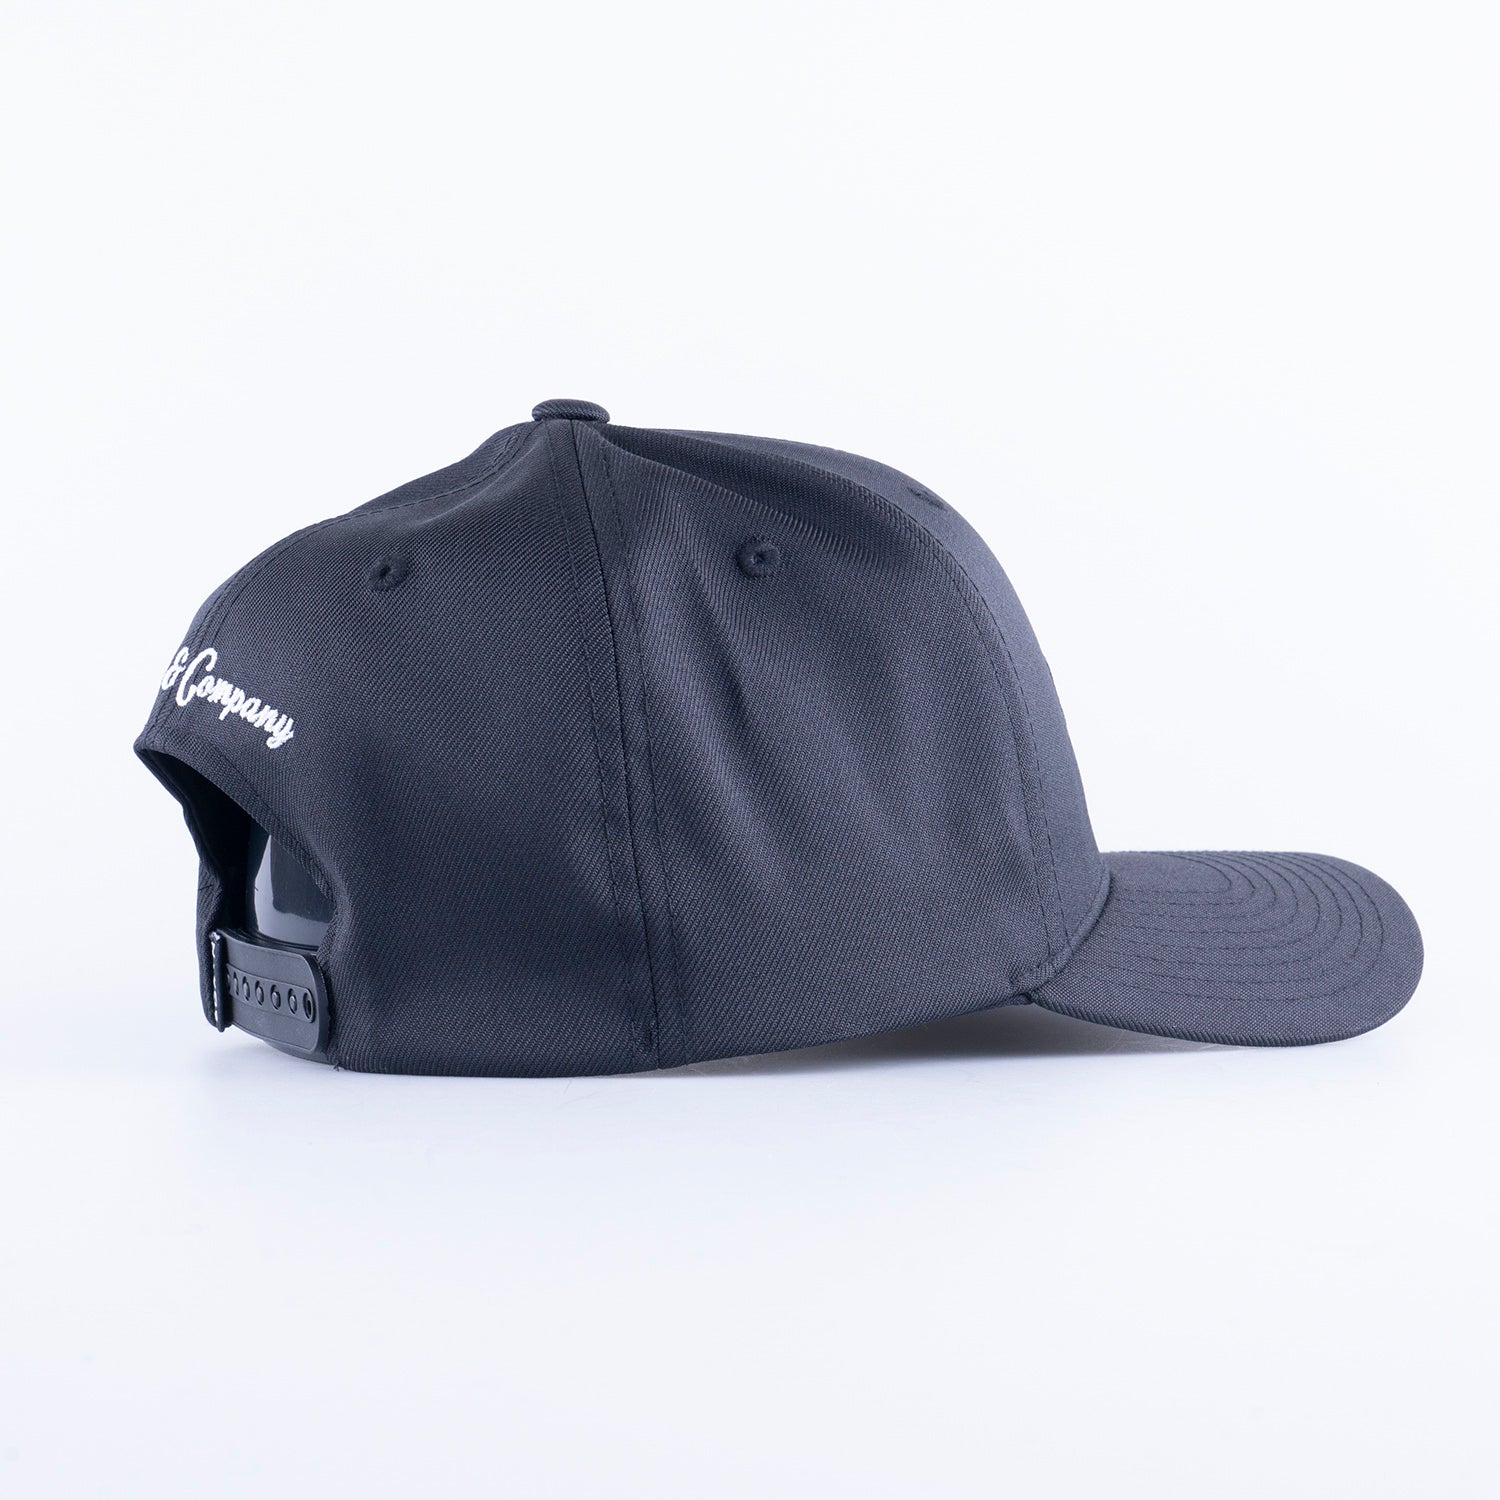 GONE HUNTING COMPACT 120 CAP - BLACK